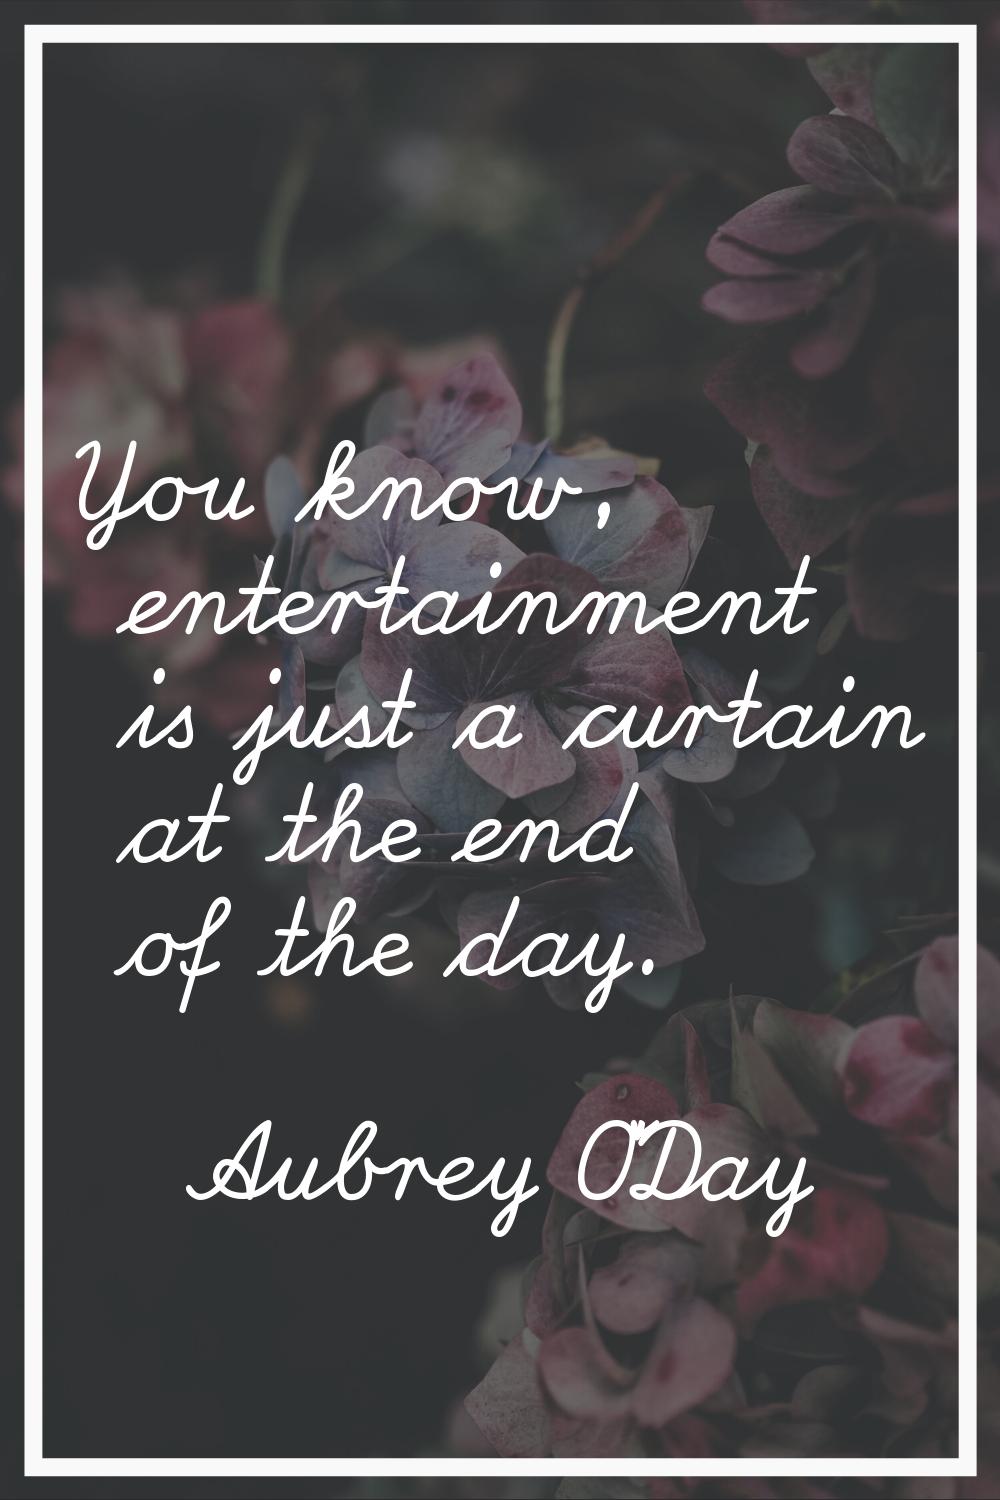 You know, entertainment is just a curtain at the end of the day.